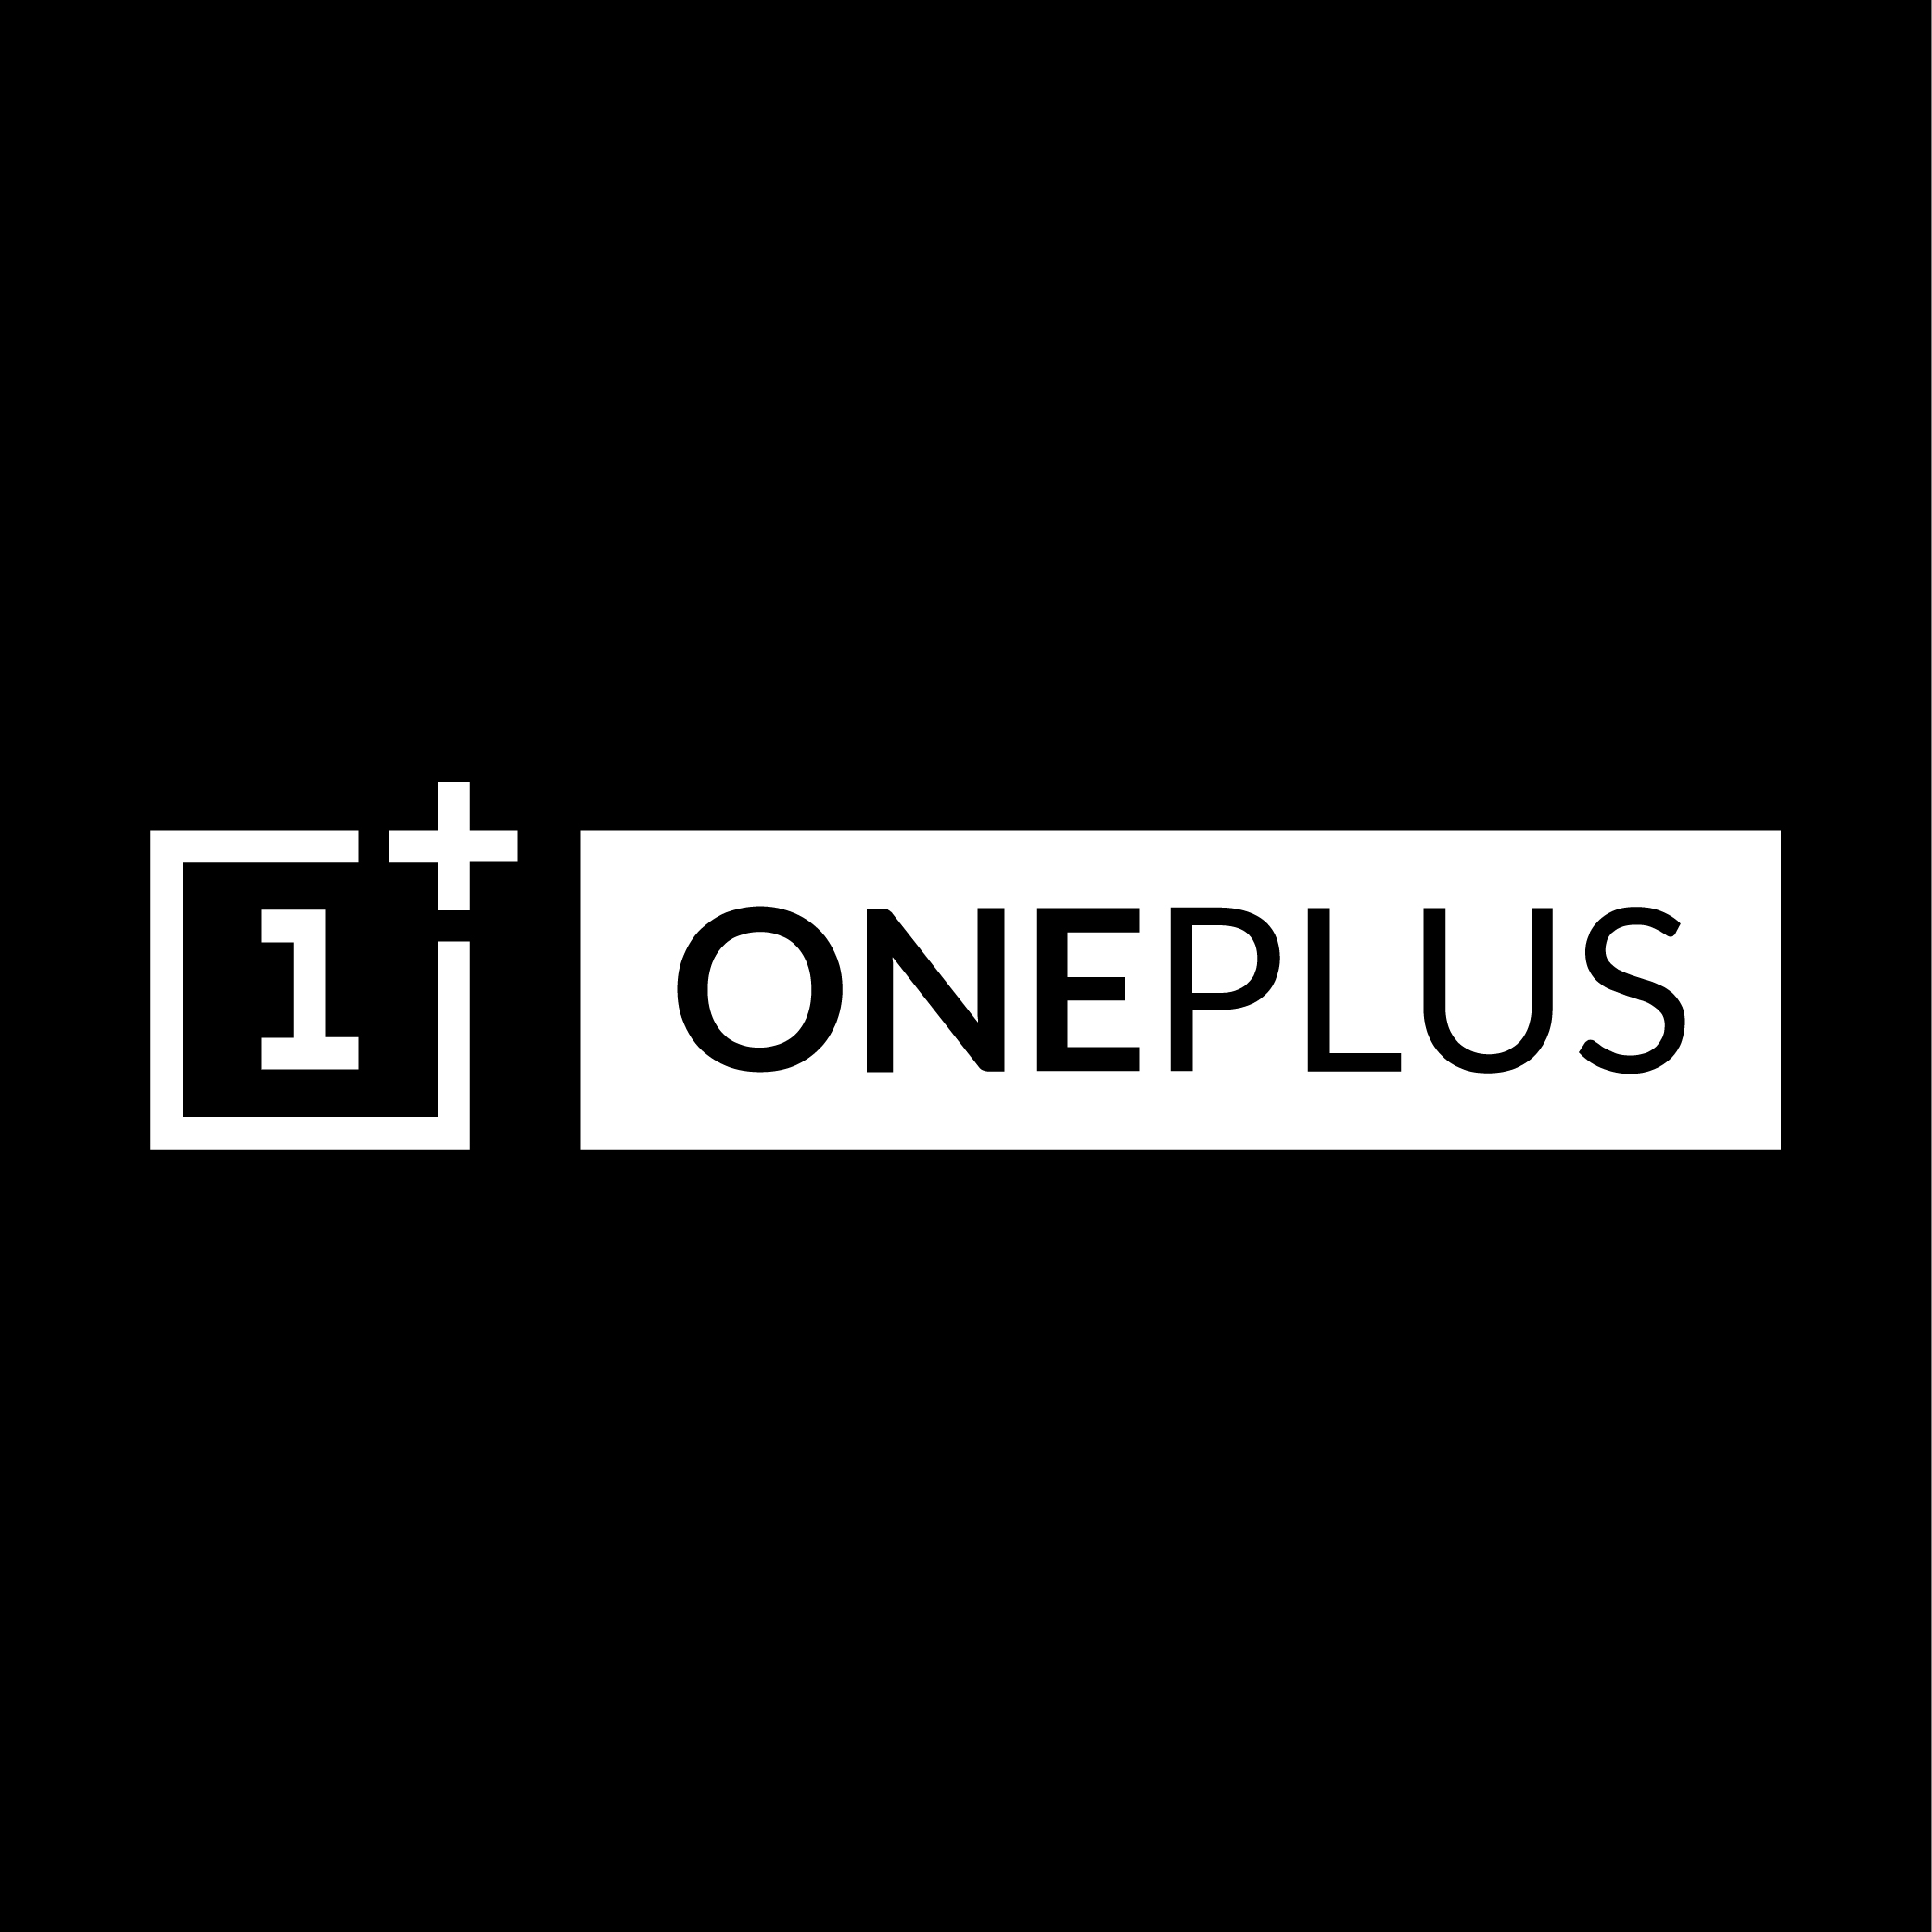 OnePlus's March 18 branding reveal spoiled by Chinese trademark office